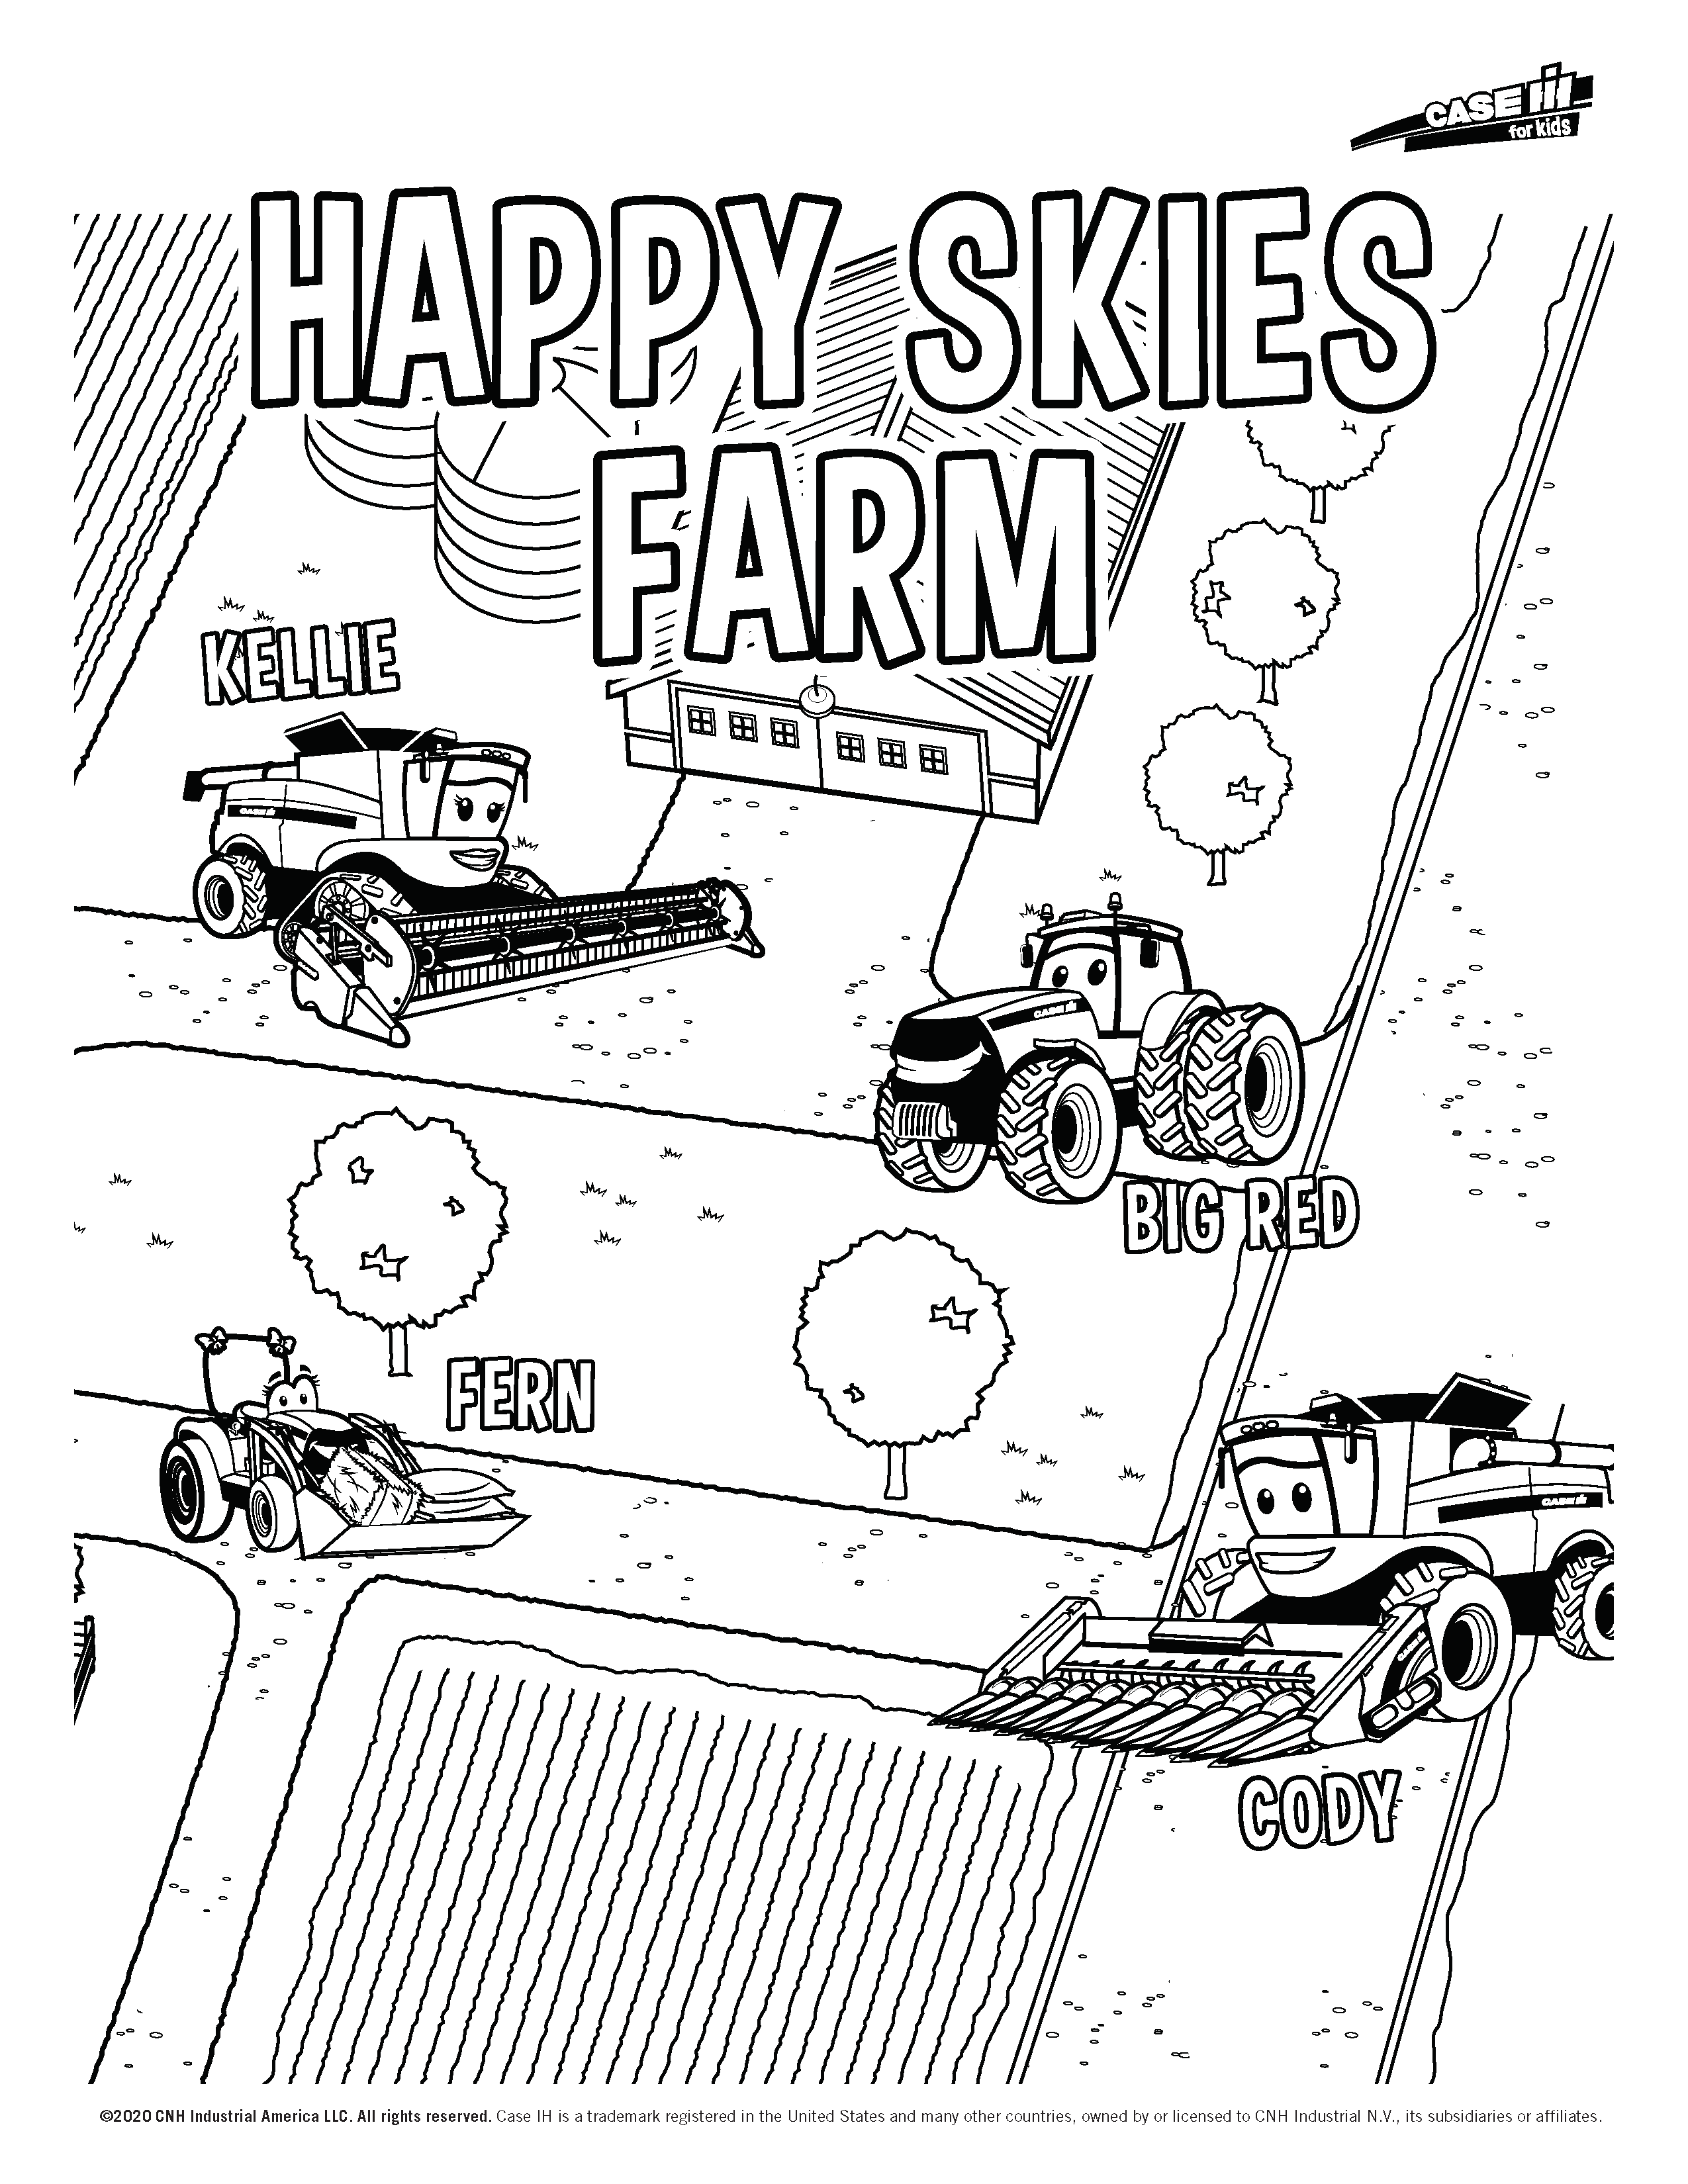 Casey and Friends_Happy Skies Farm_01.png